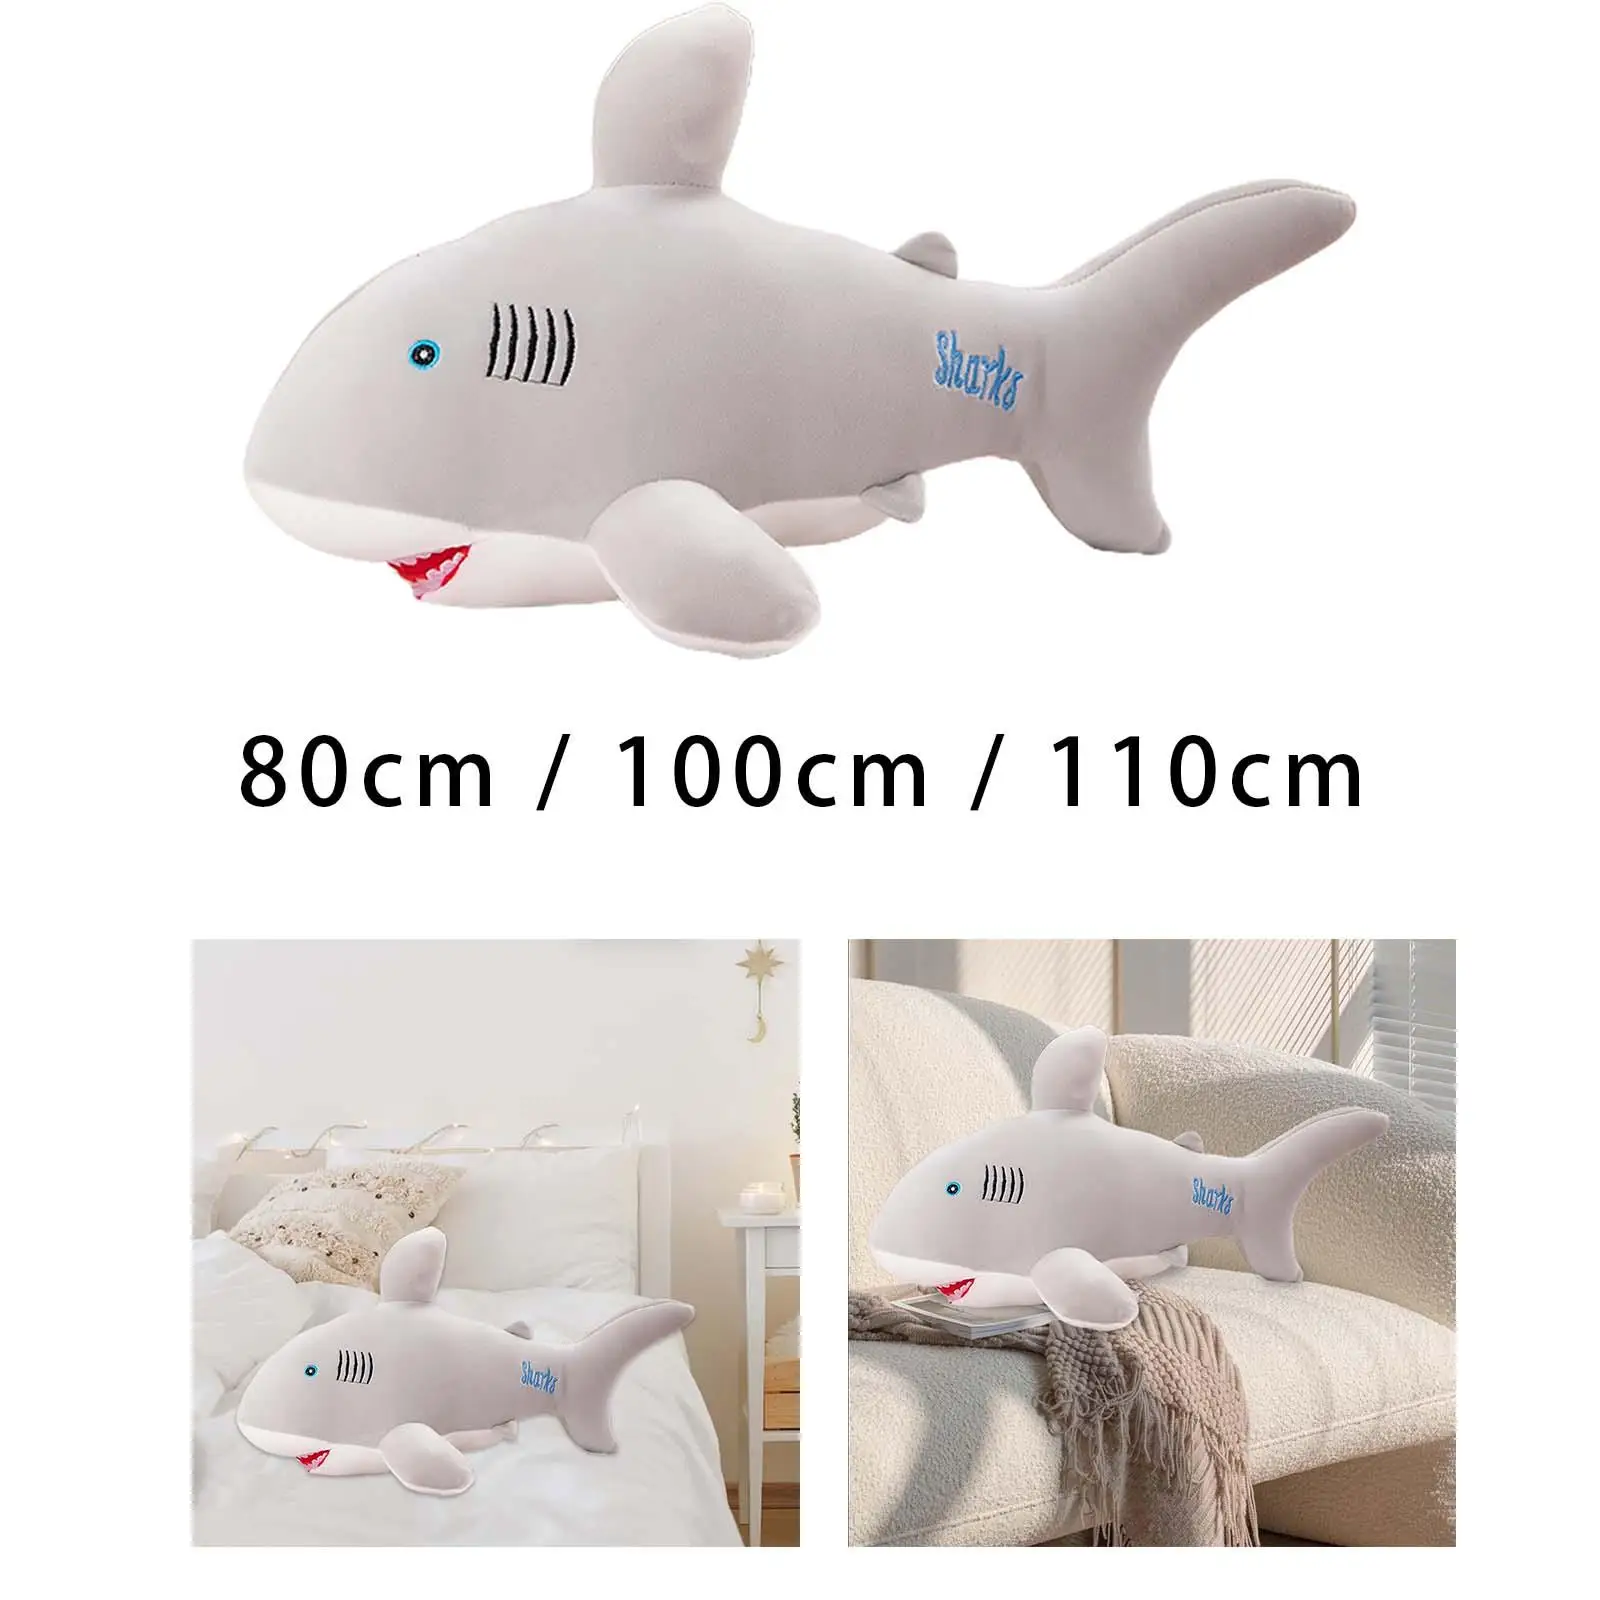 Cute Stuffed Plush Shark Ornament Lovely Adorable Collectible Hugging Pillows for Bedroom Sofa Birthday Easter Valentine